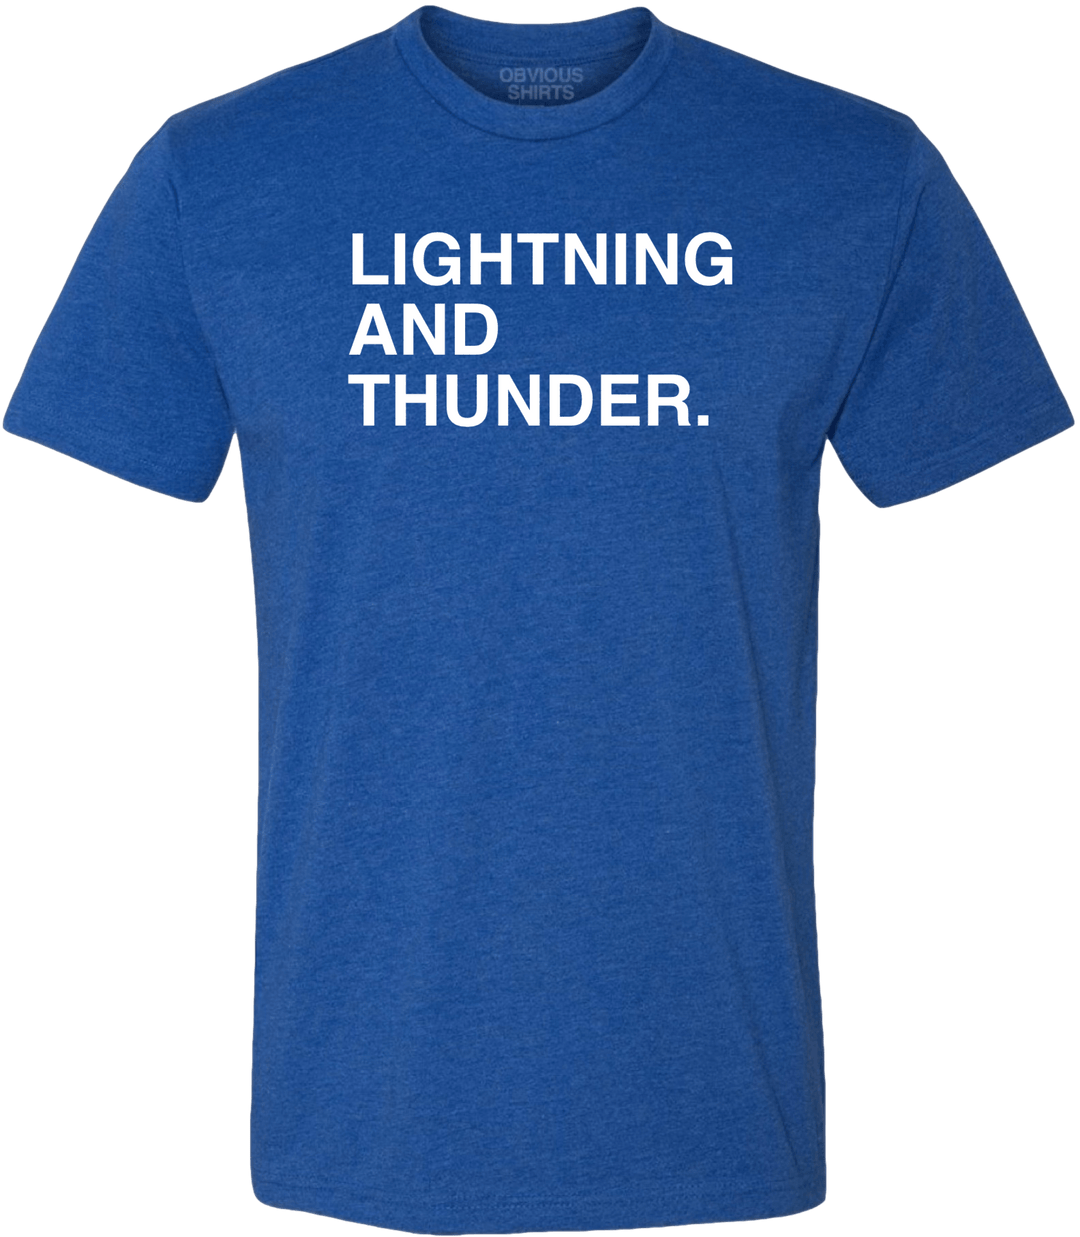 LIGHTNING AND THUNDER. - OBVIOUS SHIRTS